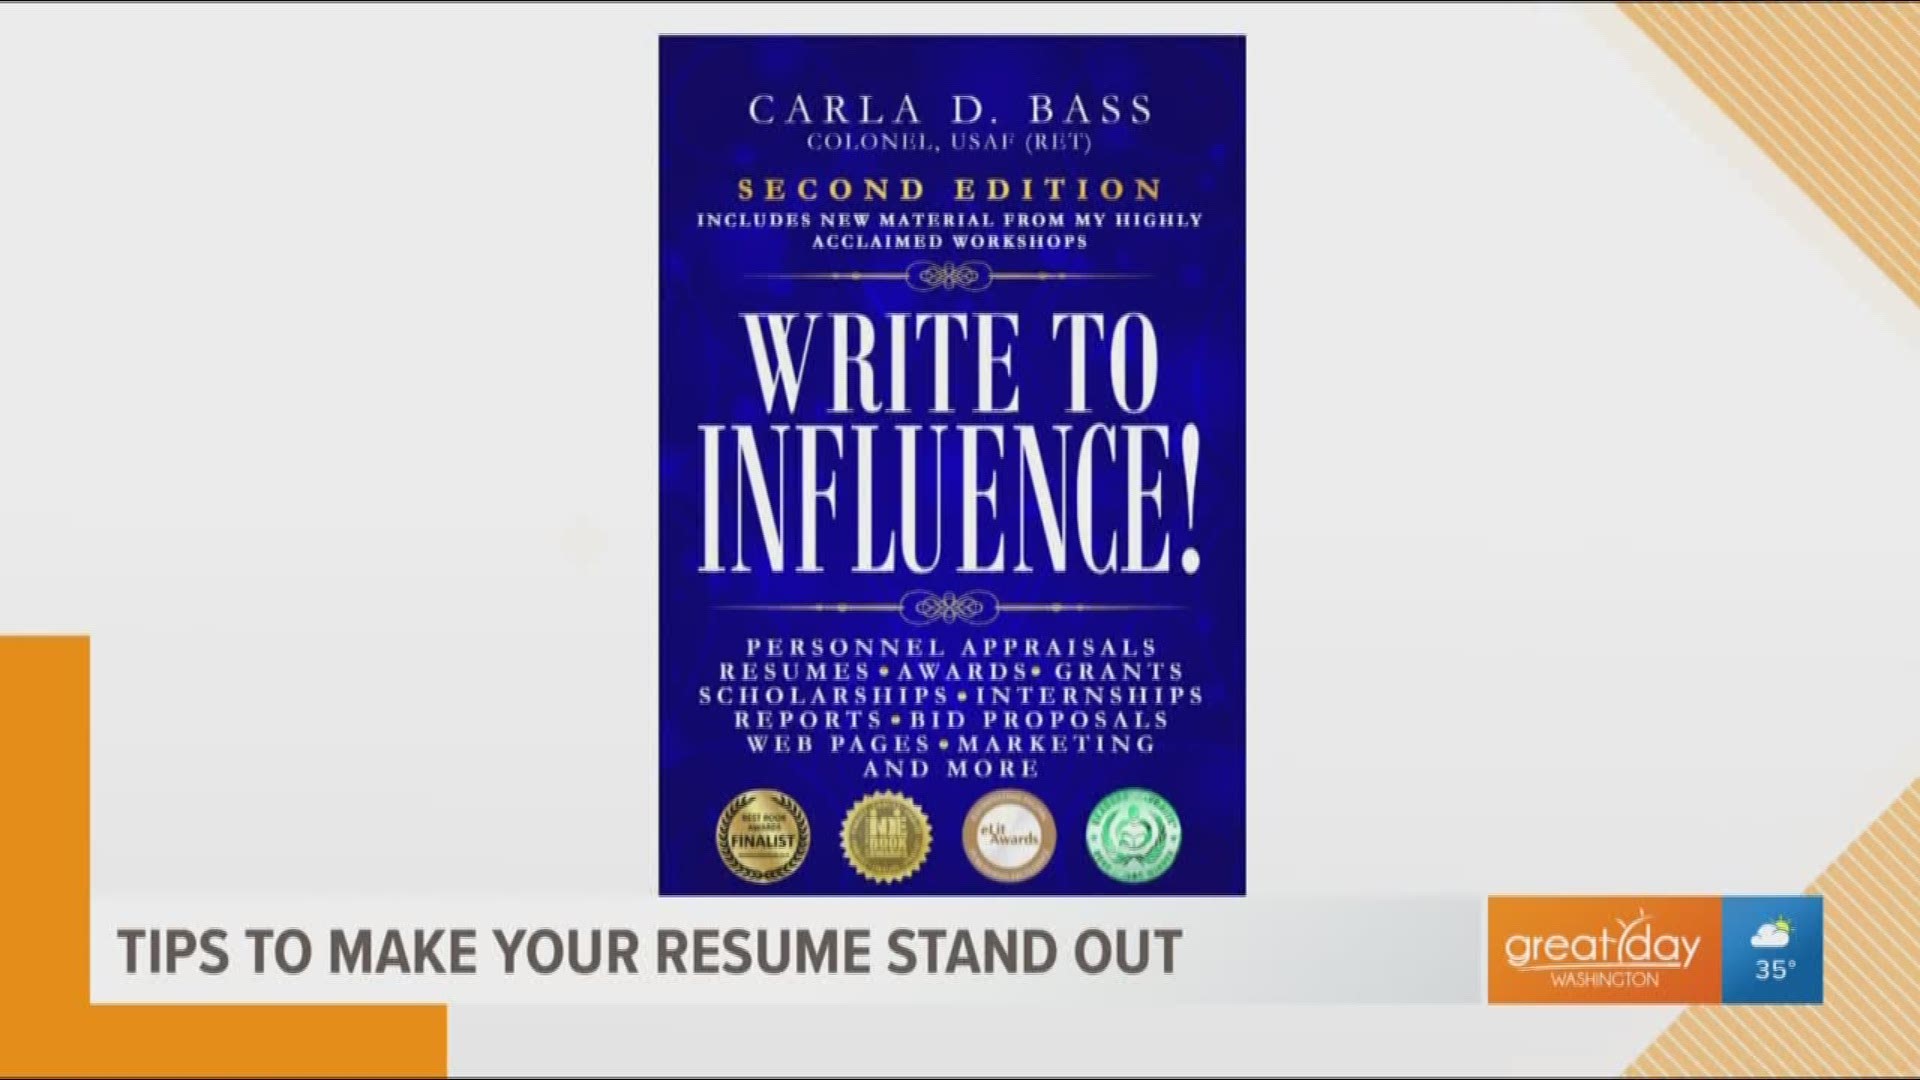 Carla D. Bass, author of "Write to Influence" shares her top tips on how to make sure your resume stands out from the bunch.